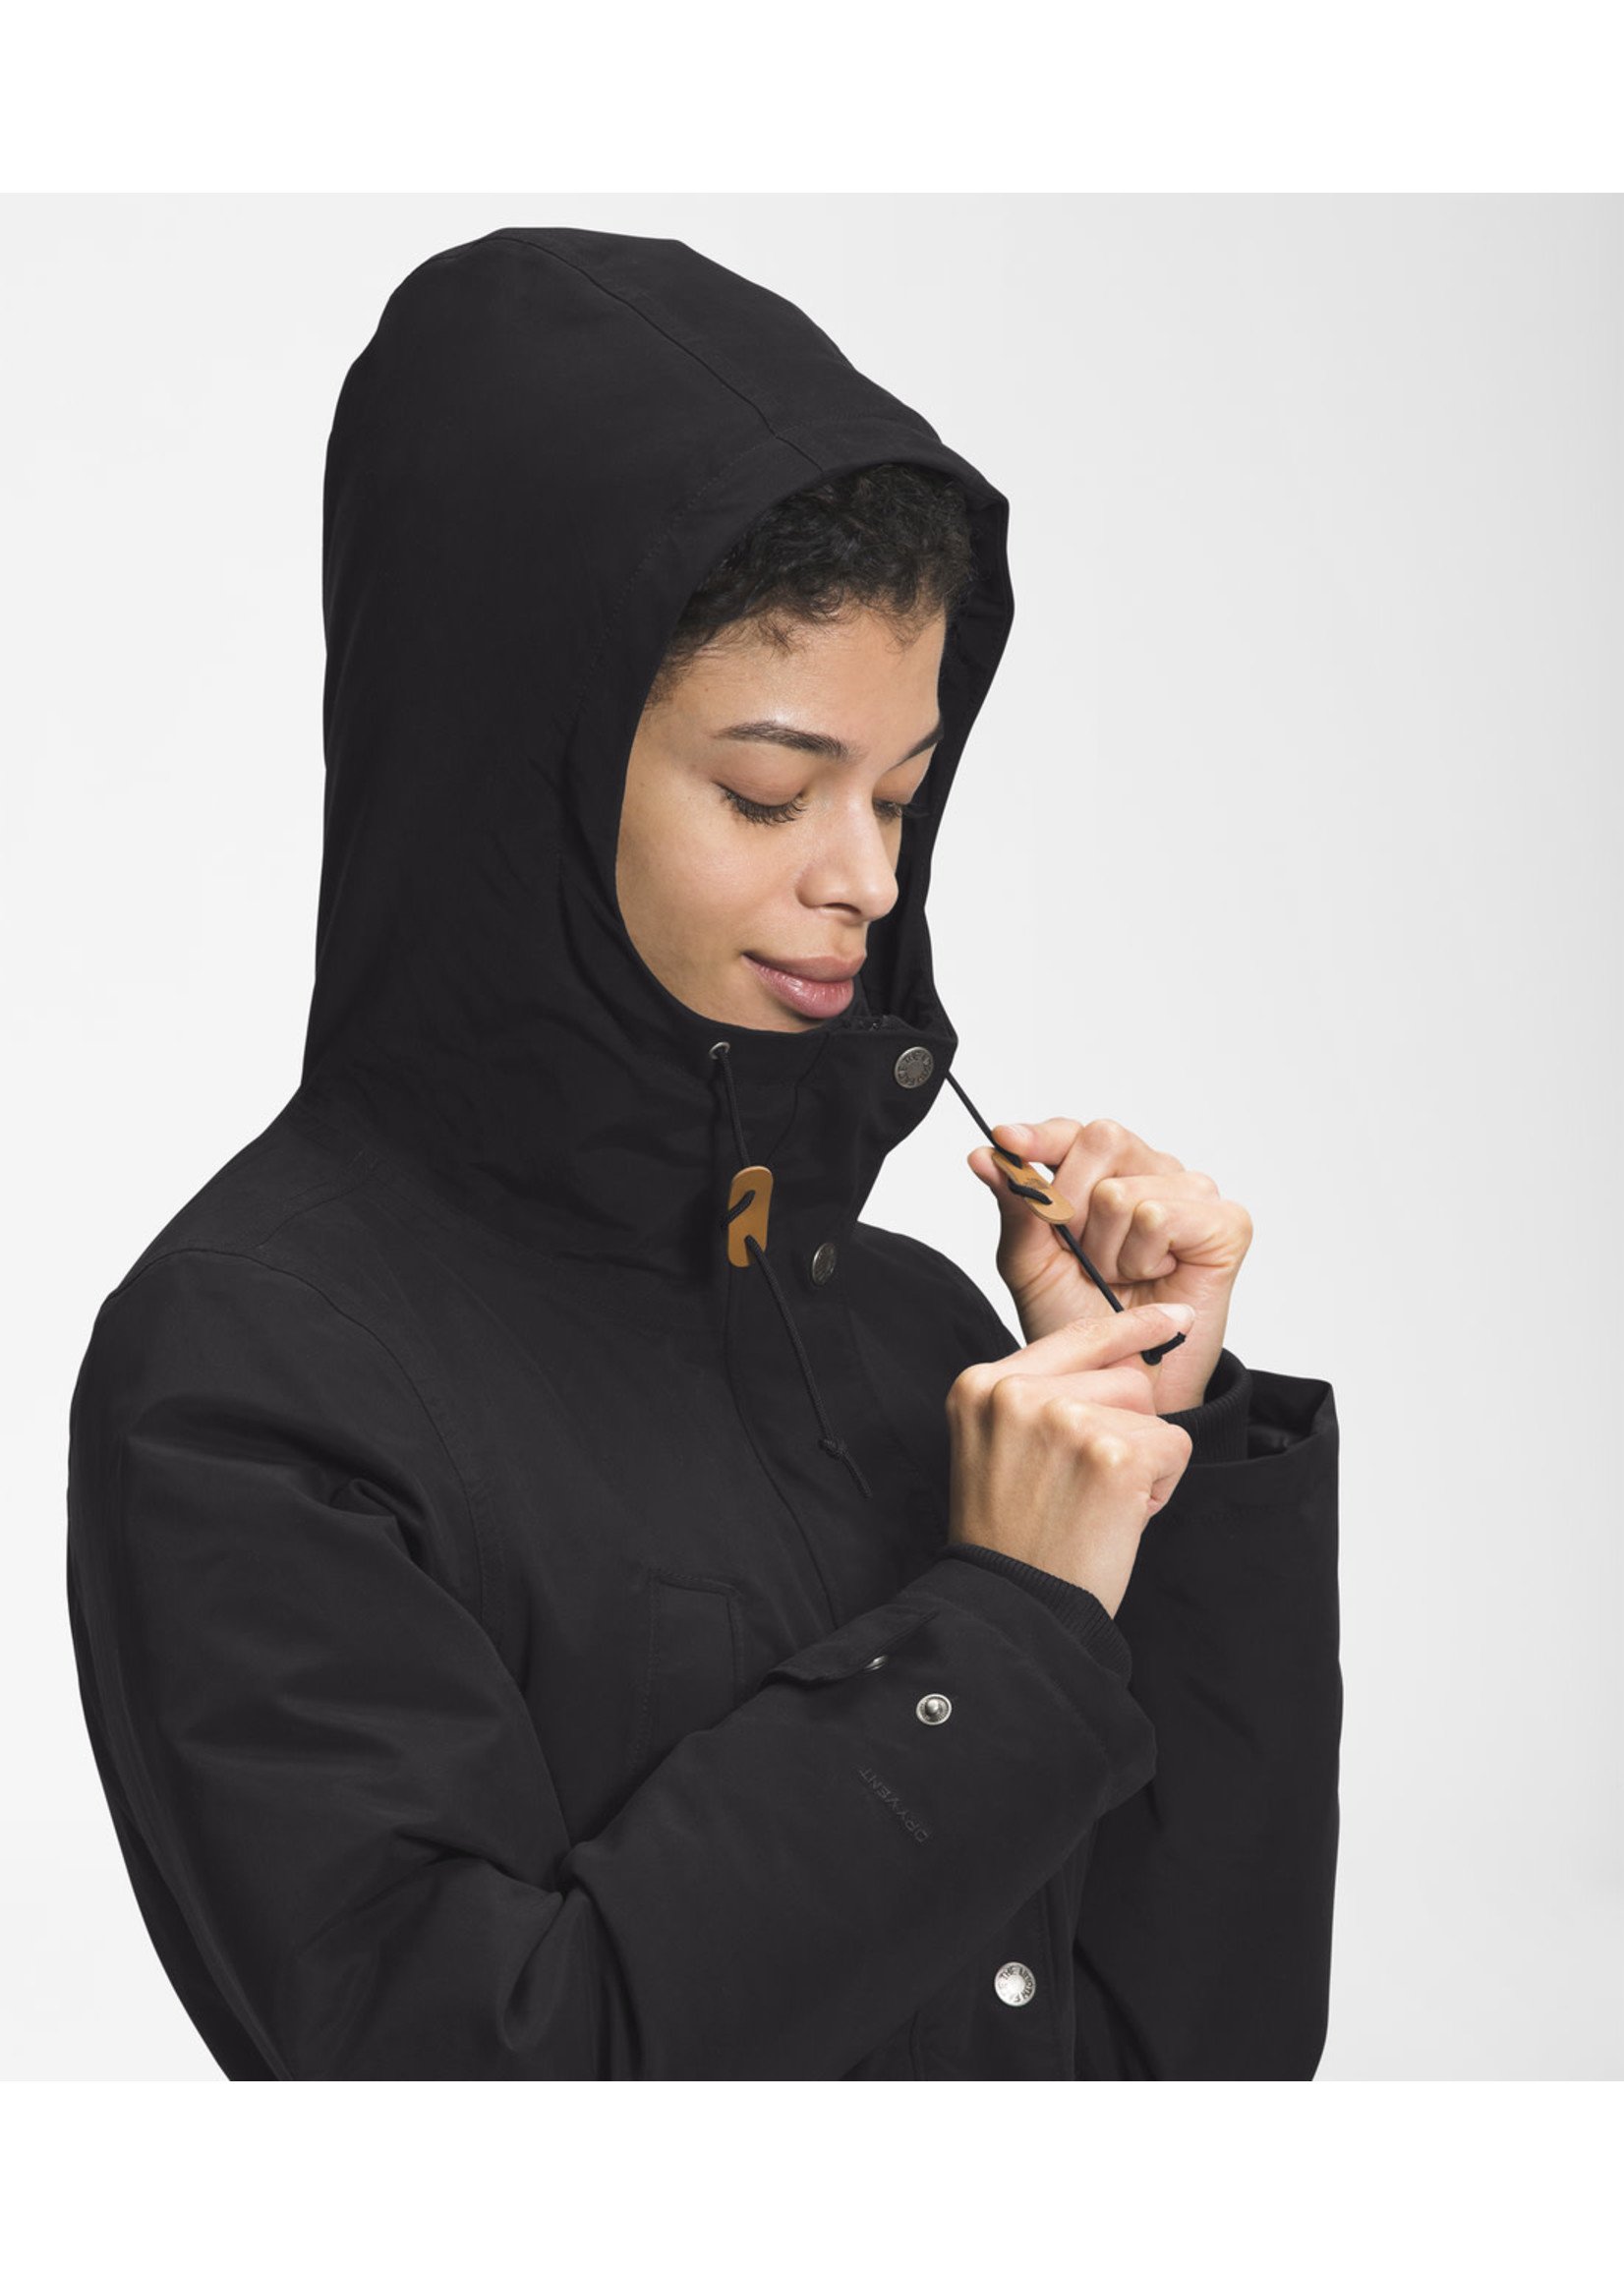 THE NORTH FACE Manteau Snow Down